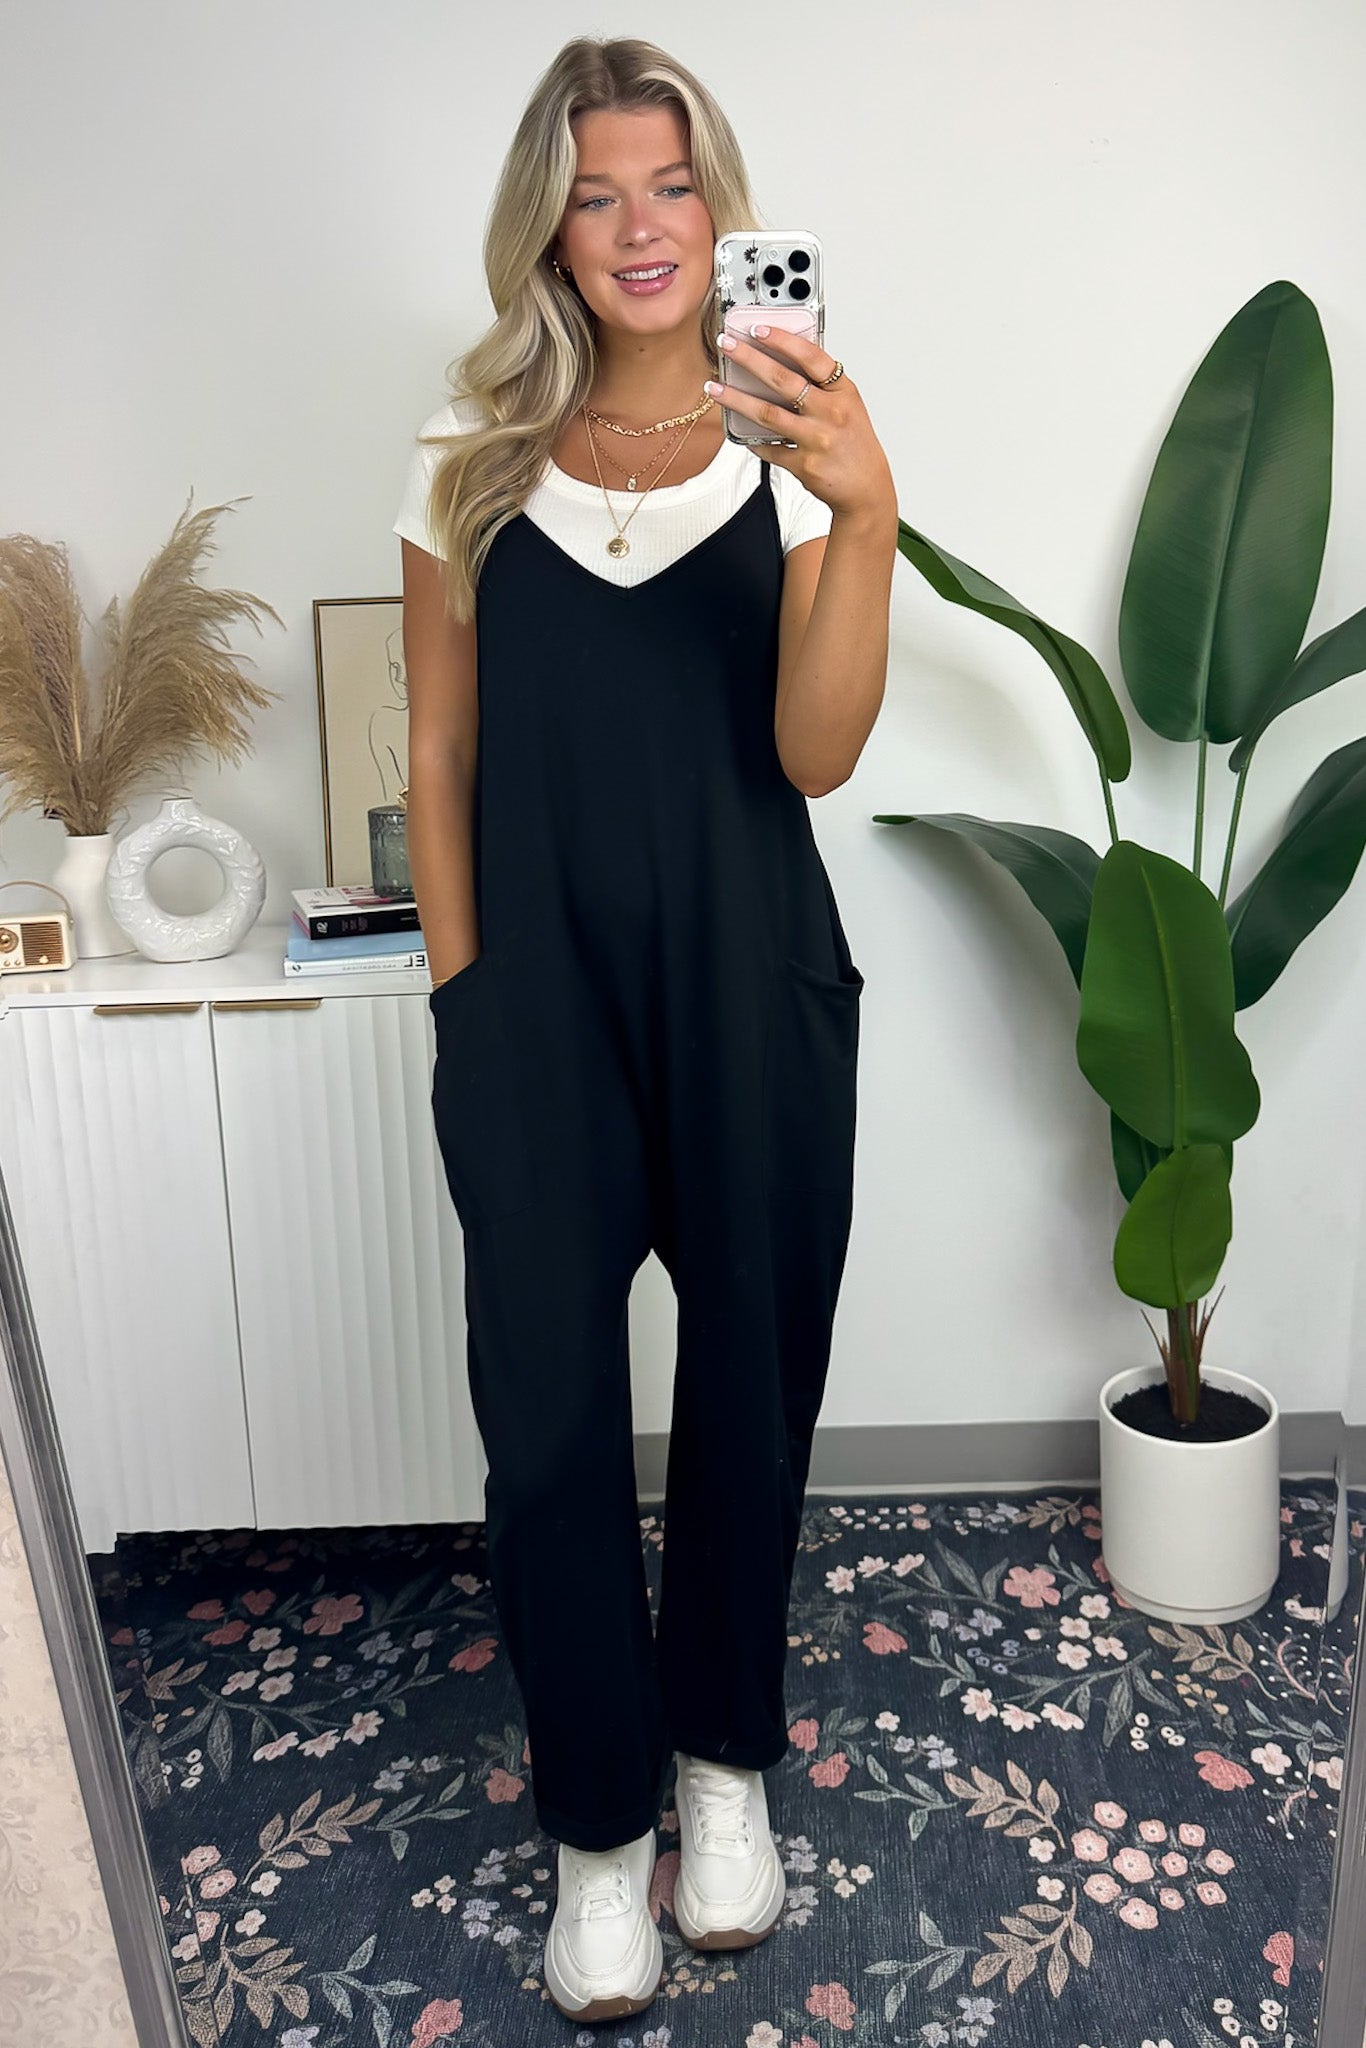  Heat Wave Relaxed Sleeveless Jumpsuit - Madison and Mallory